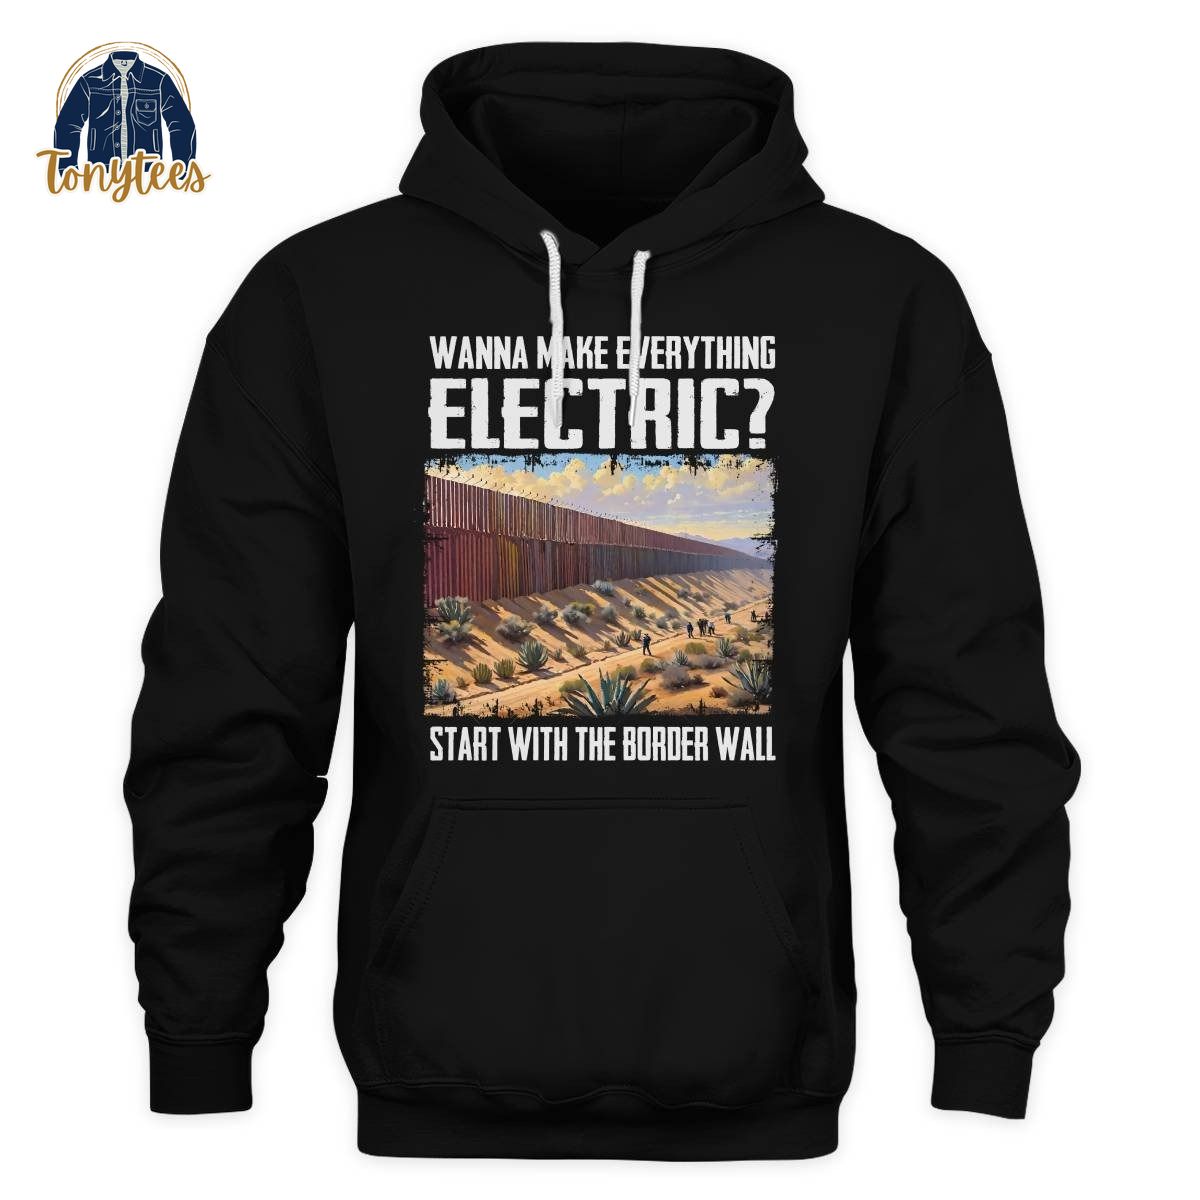 Wanna make everything electric start with the border wall shirt